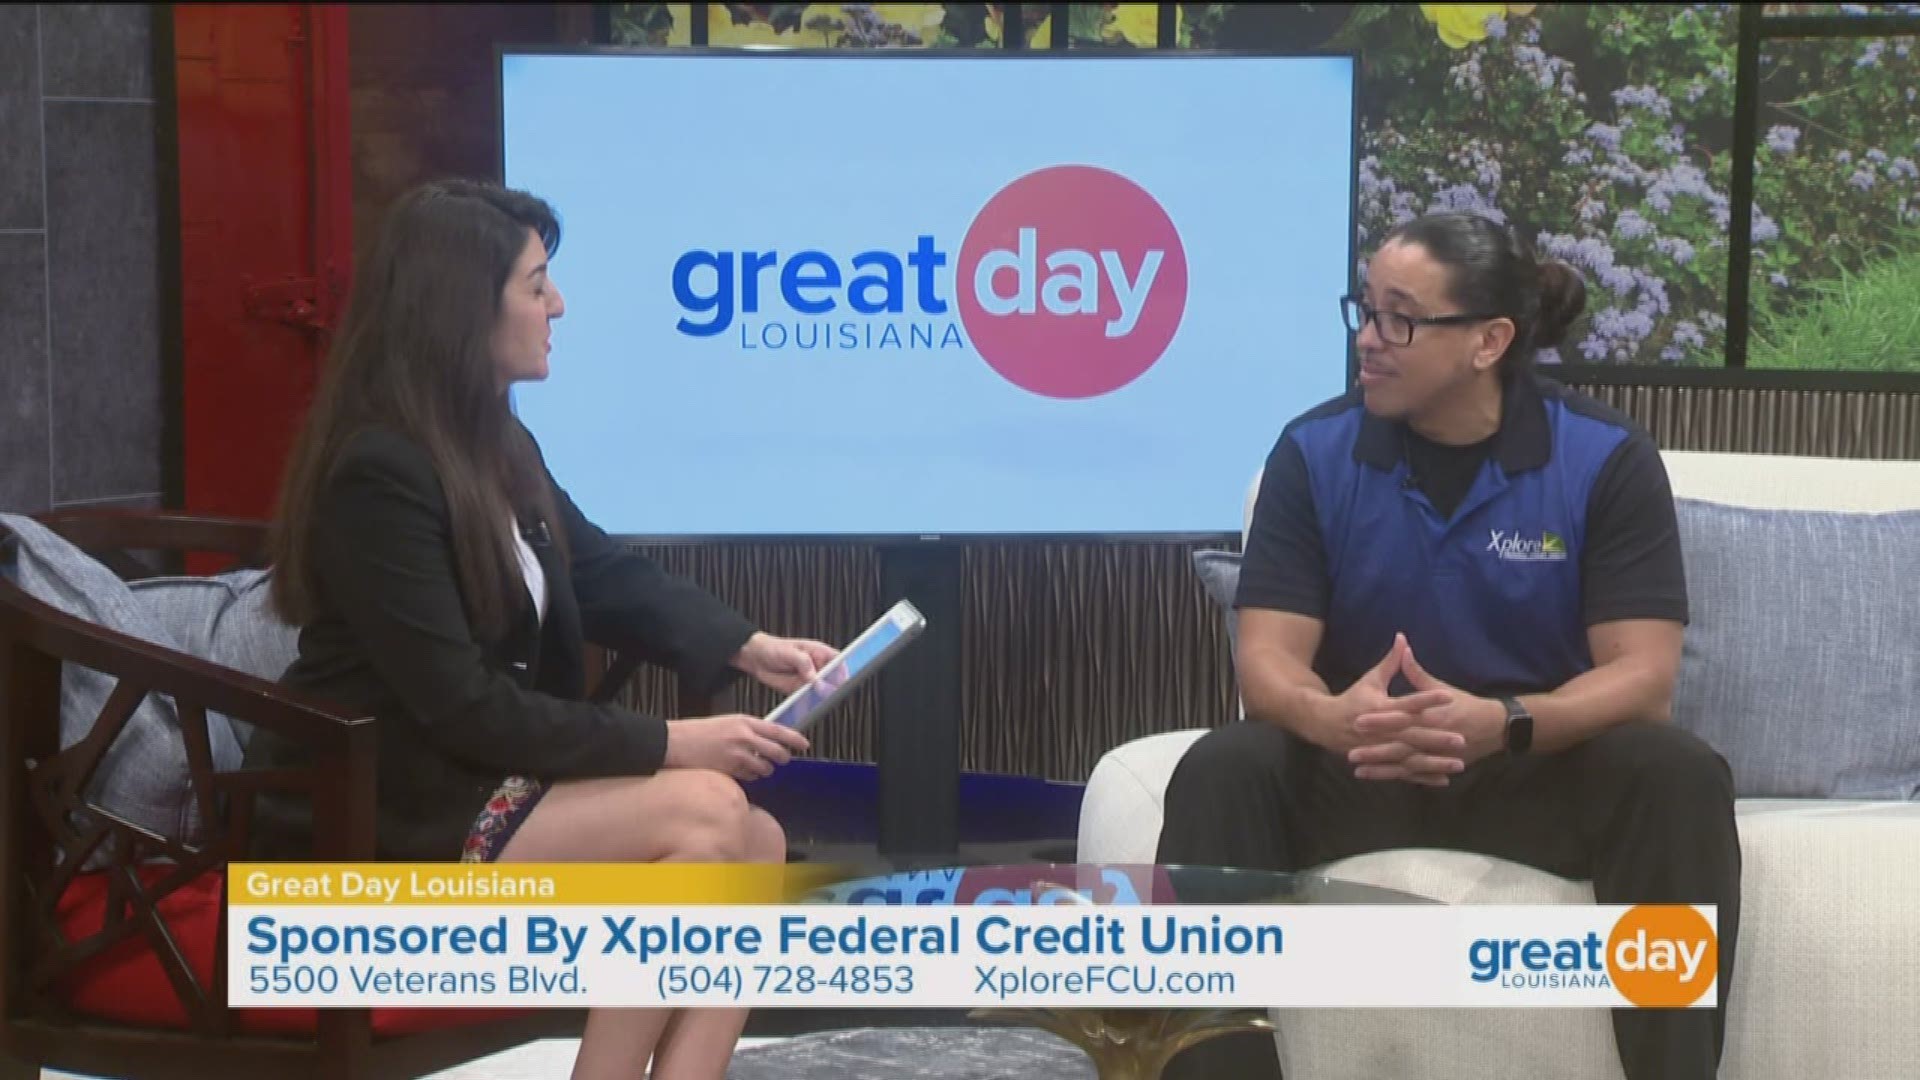 Xplore Federal Credit Union is a local, full service financial institution serving the communities of Orleans and Jefferson Parishes for over 70 years. Marketing Manager, Michael Roussel Jr.  joined us again to educate viewers on the difference between good debt and bad debt and how Xplore can help you manage both. Contact them for a credit consultation today at www.xplorefcu.com.